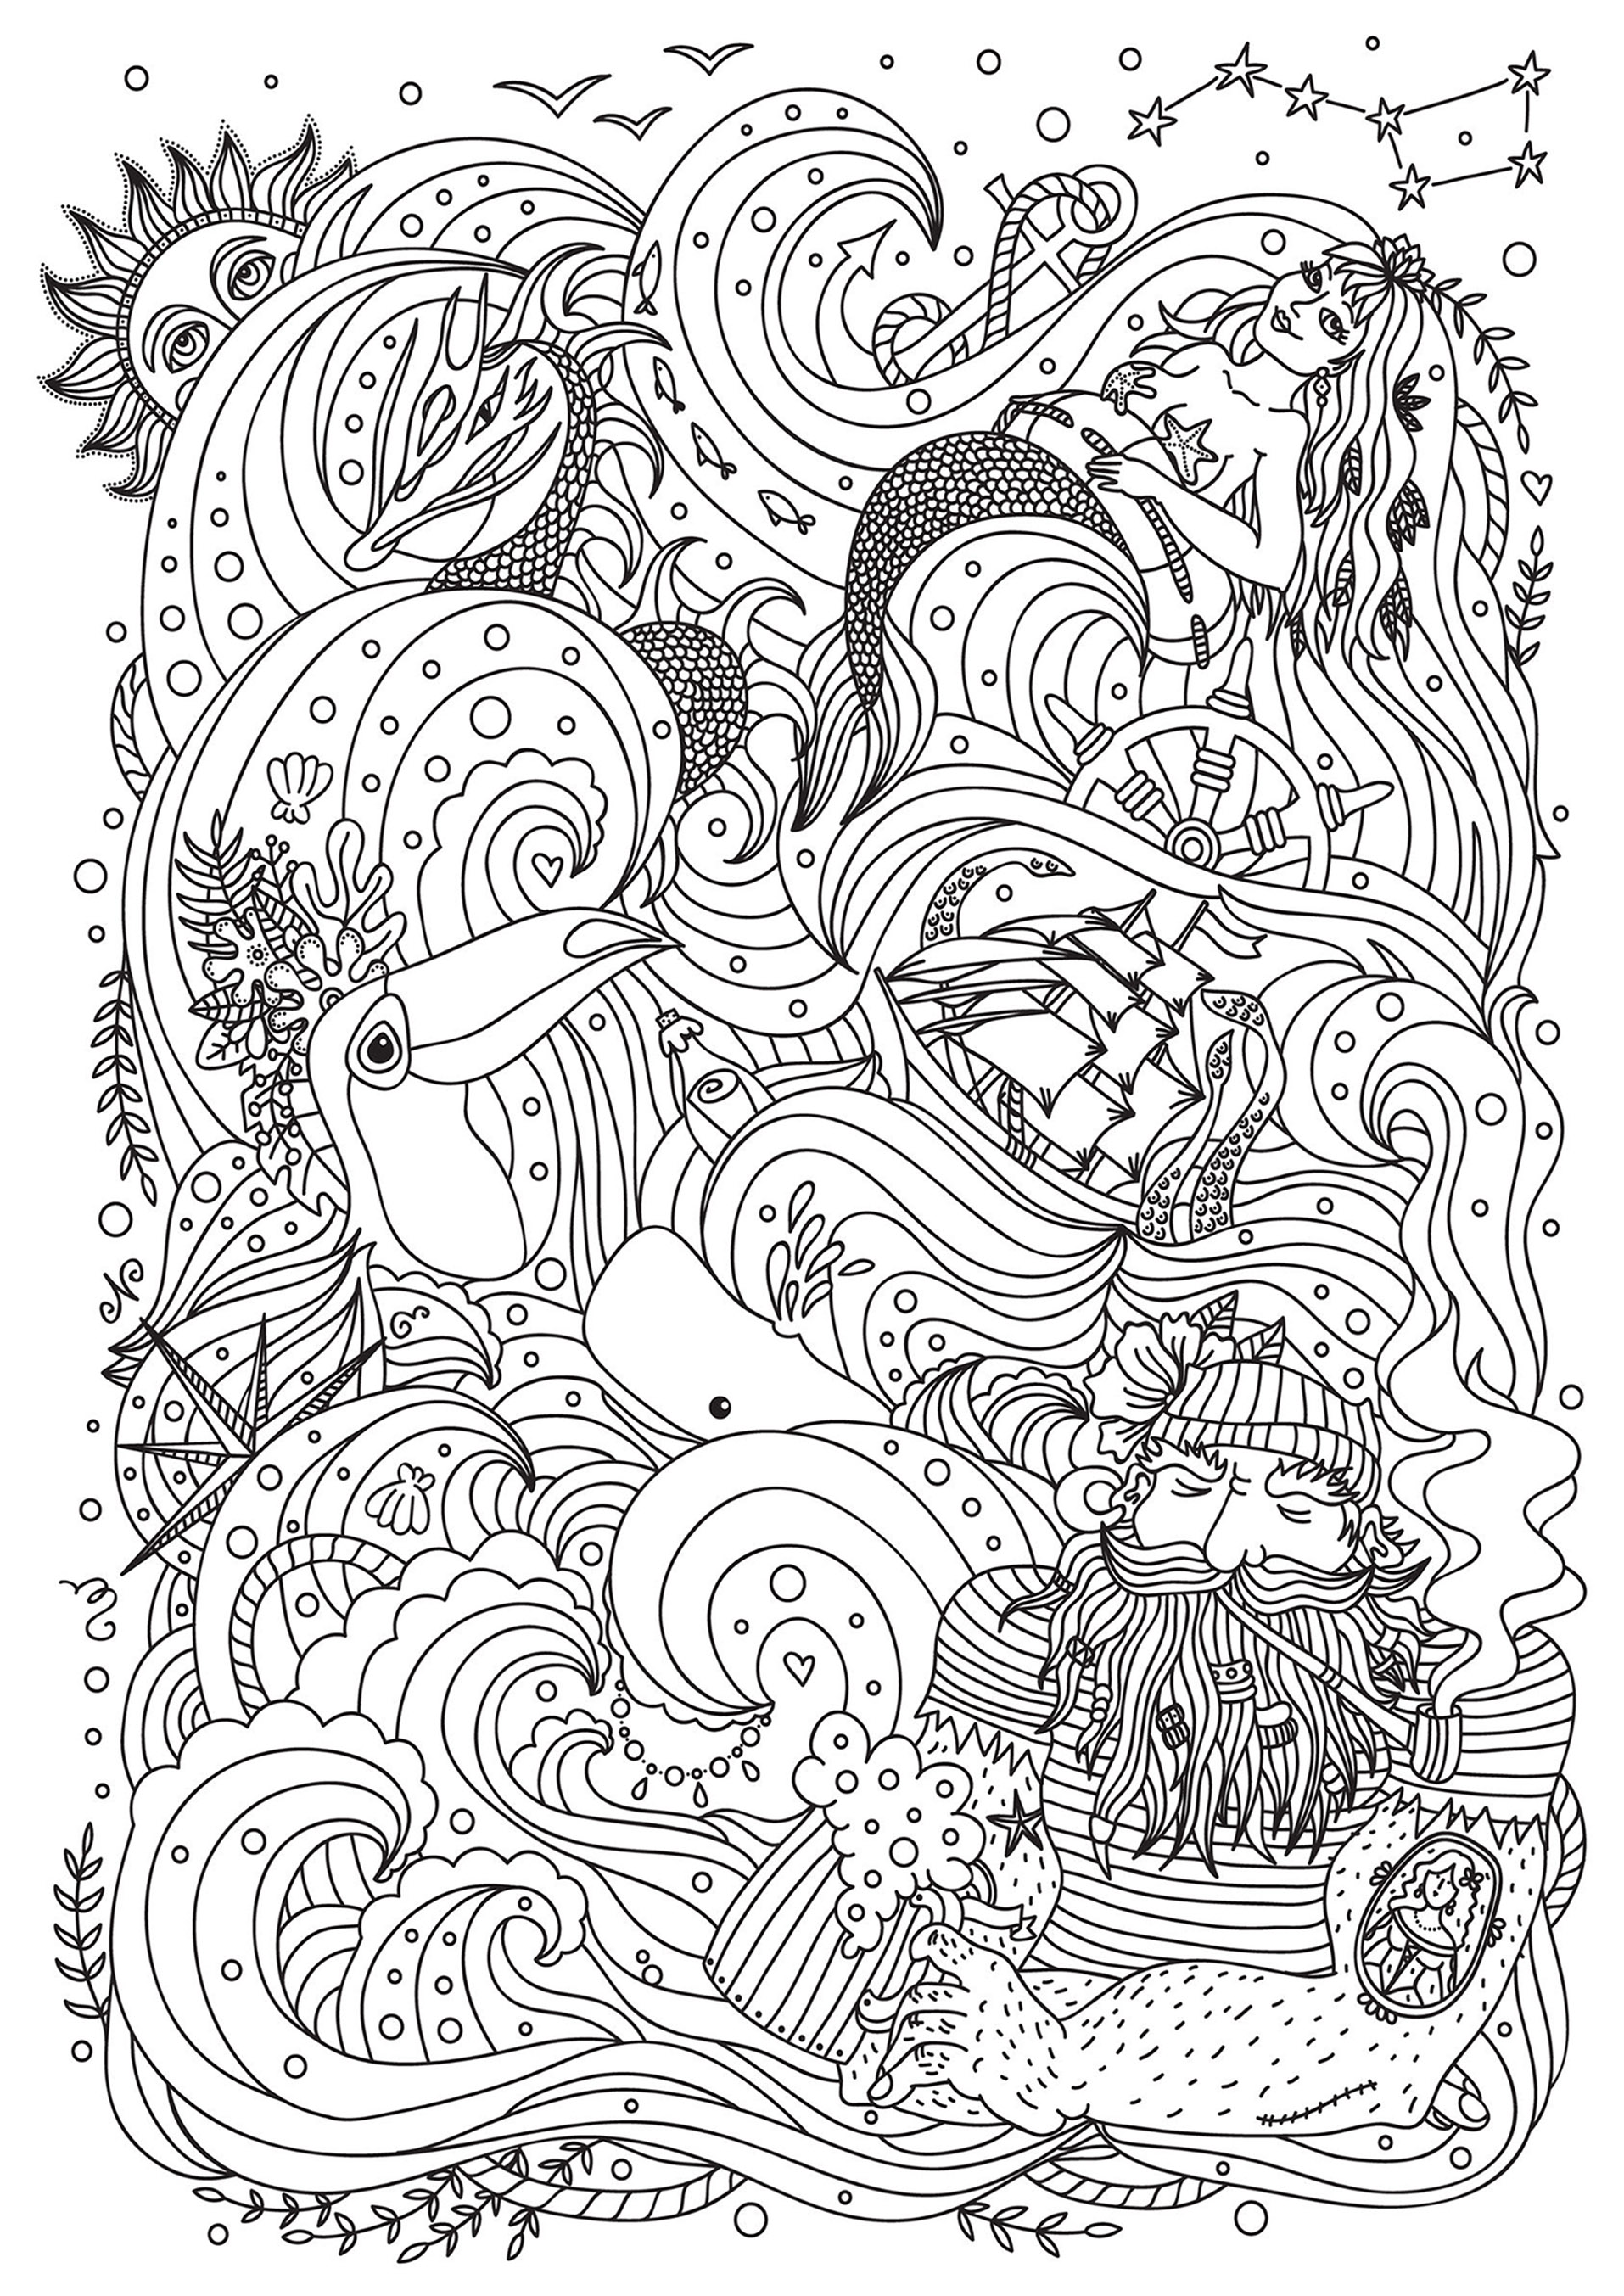 Mermaids picture to color, easy for kids